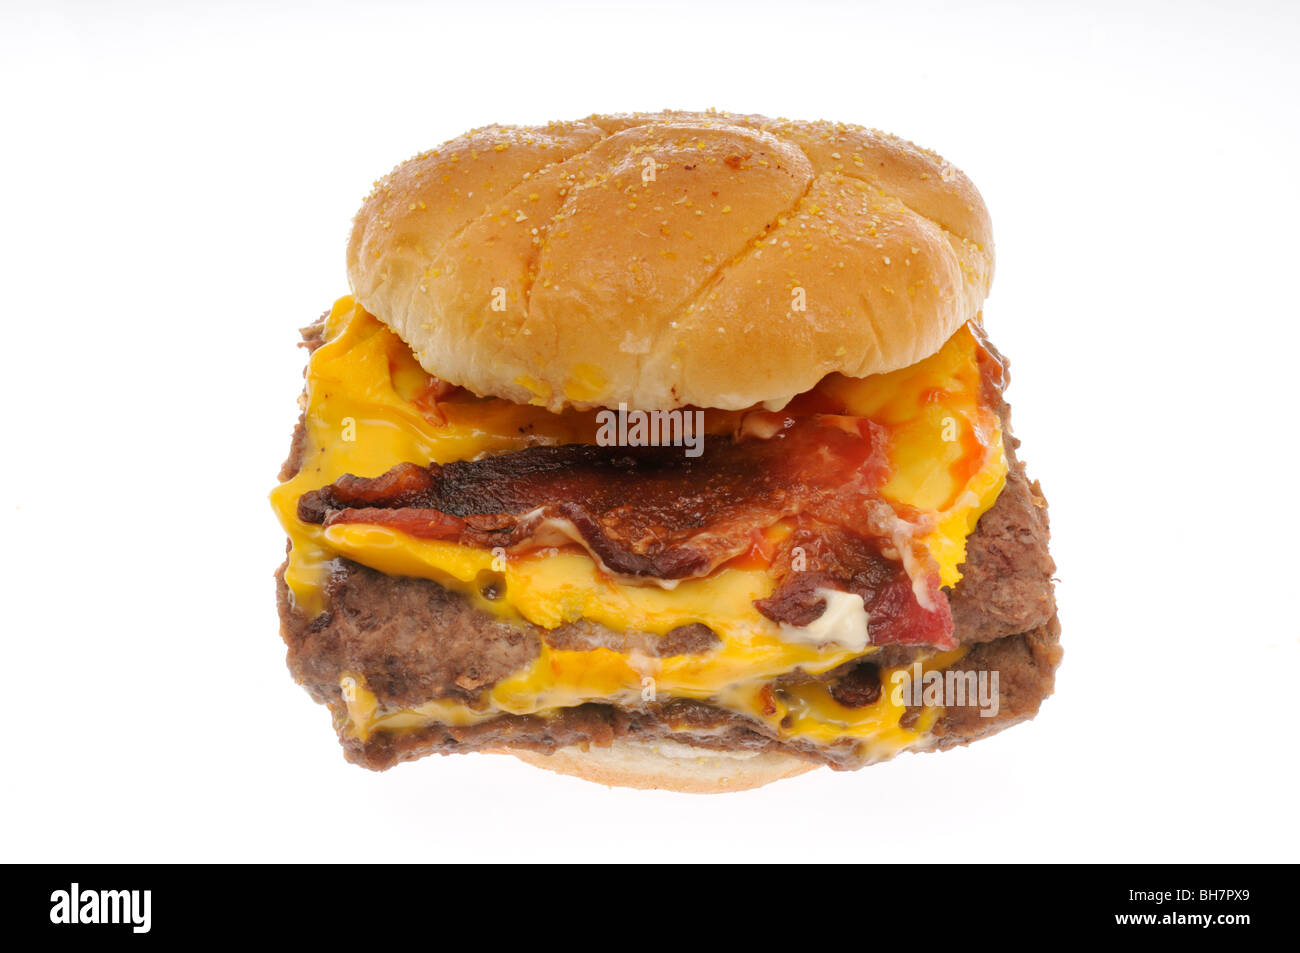 Wendy's bacon double cheeseburger with bun on white background Stock Photo